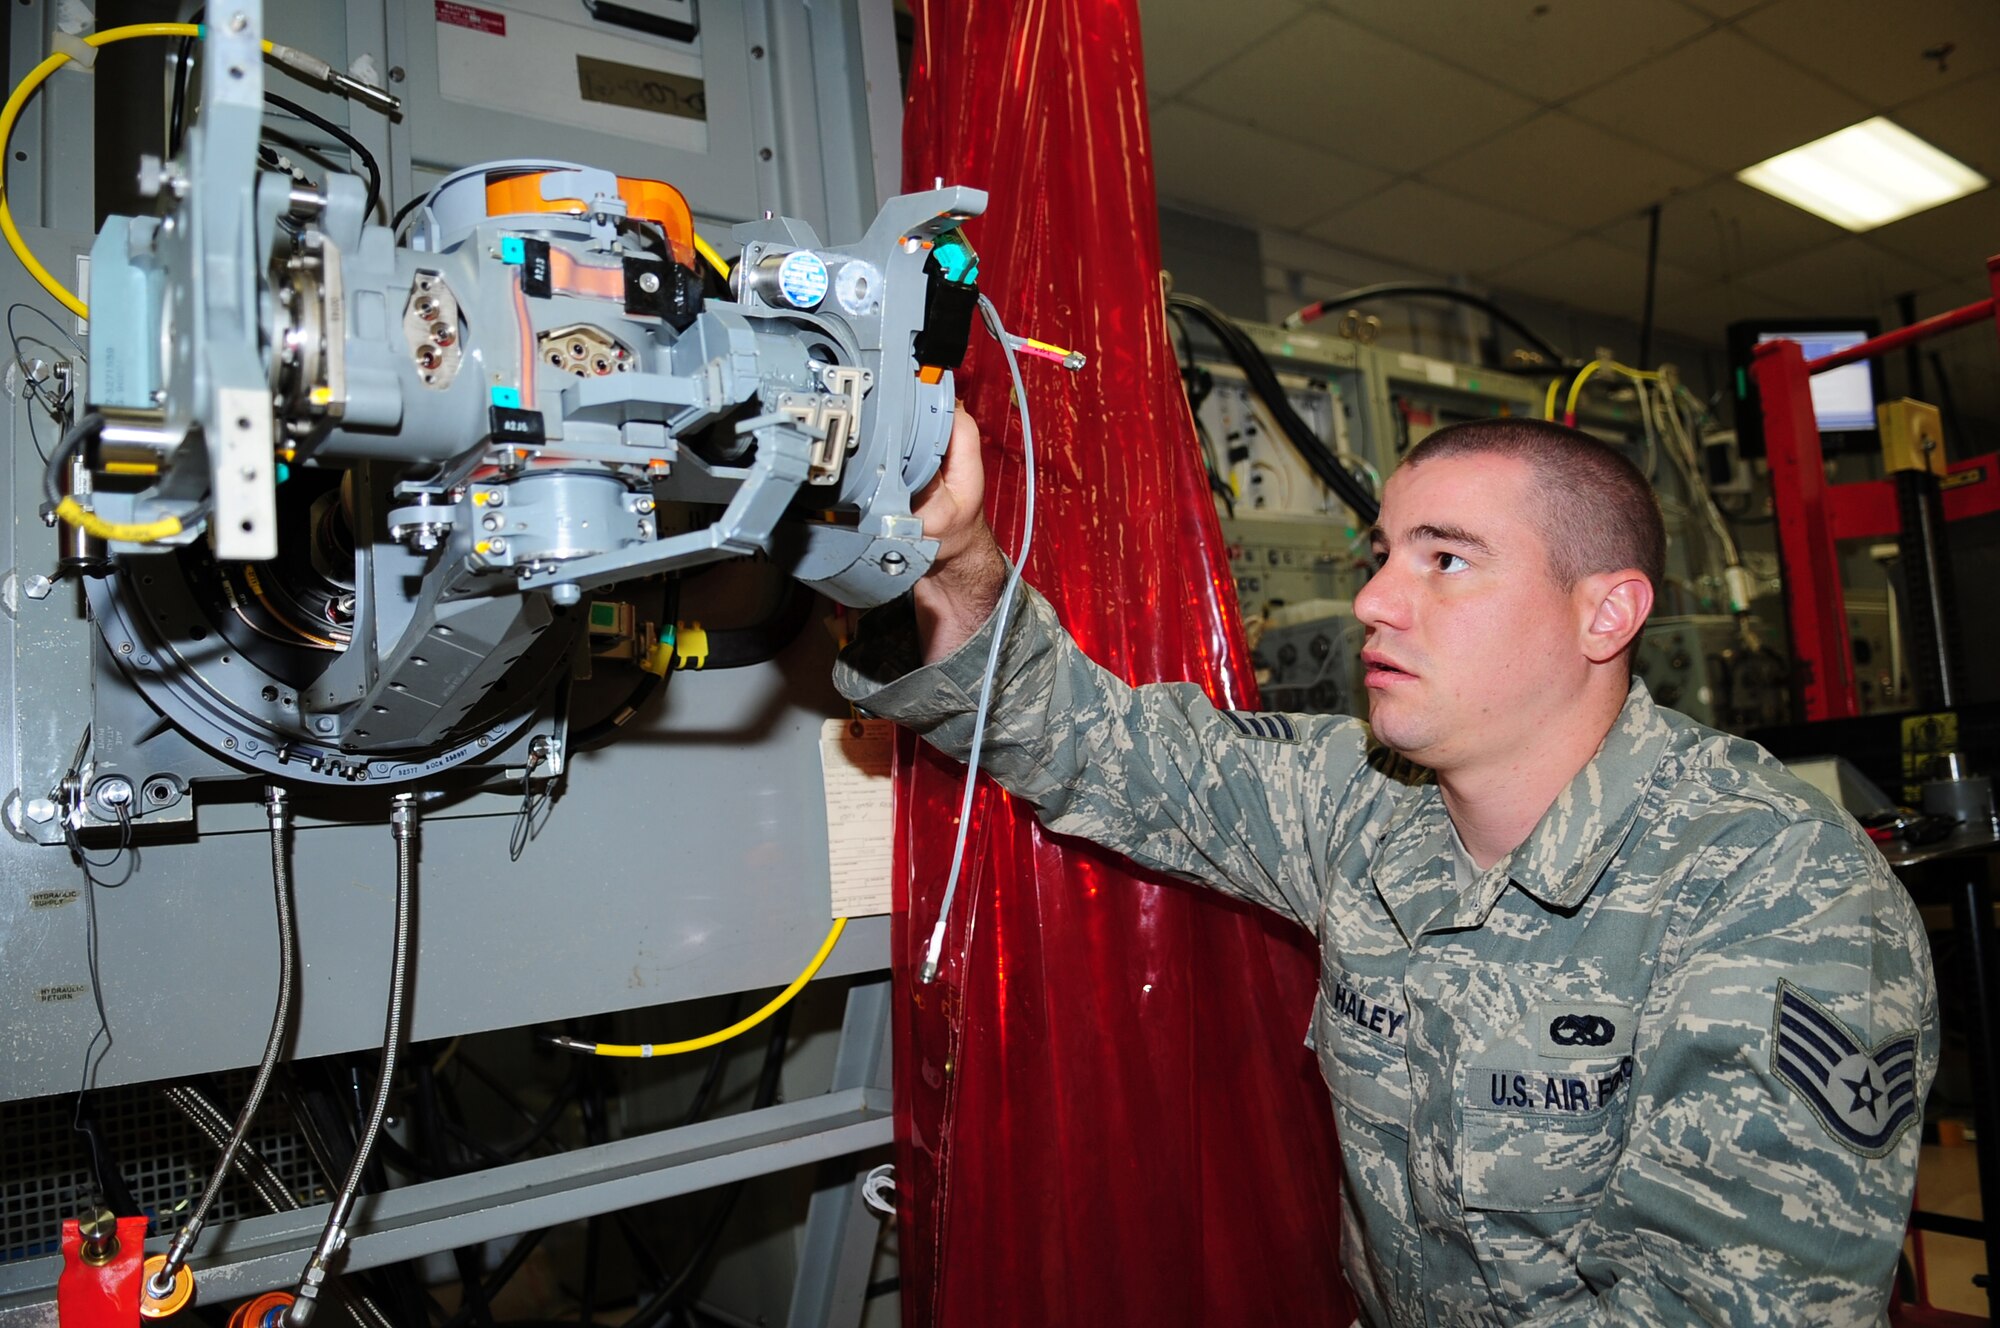 Staff Sgt. Richard Haley, 4th Component Maintenance Squadron, repairs an F-15E Strike Eagle antenna on Seymour Johnson Air Force Base, N.C., March 10, 2009. While Airmen in the 4th Aircraft Maintenance Squadron perform maintenance on the flightline, 4th CMS Airmen perform their work in back-shops, off the flightline.  (U.S. Air Force photo by Airman 1st Class Rae Perry)